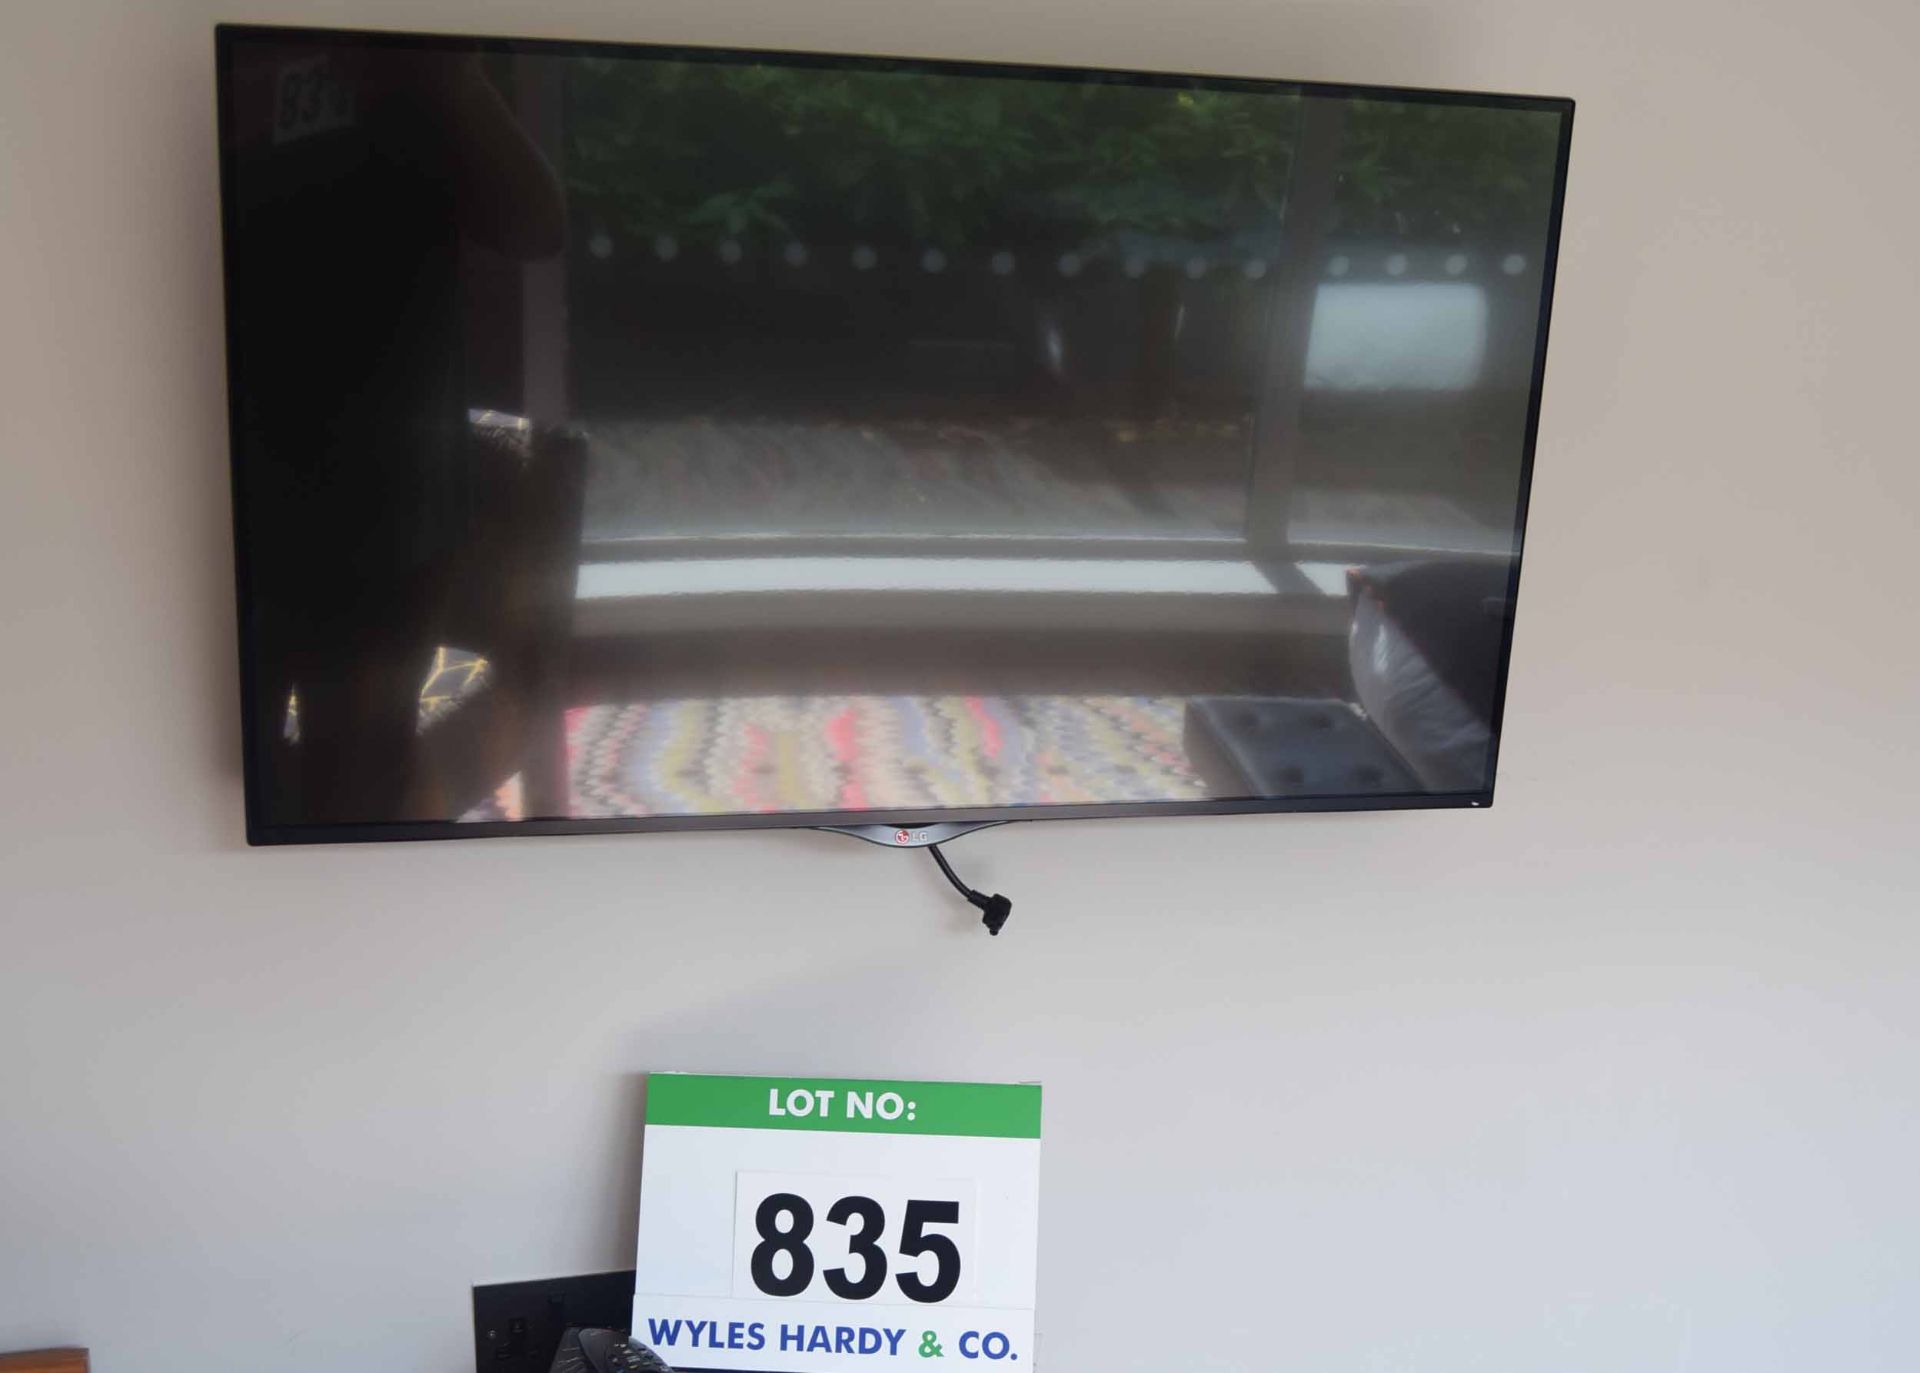 An LG 42UB820V 42 inch Smart Television on an Articulated Wall mount with Hand Held Remote